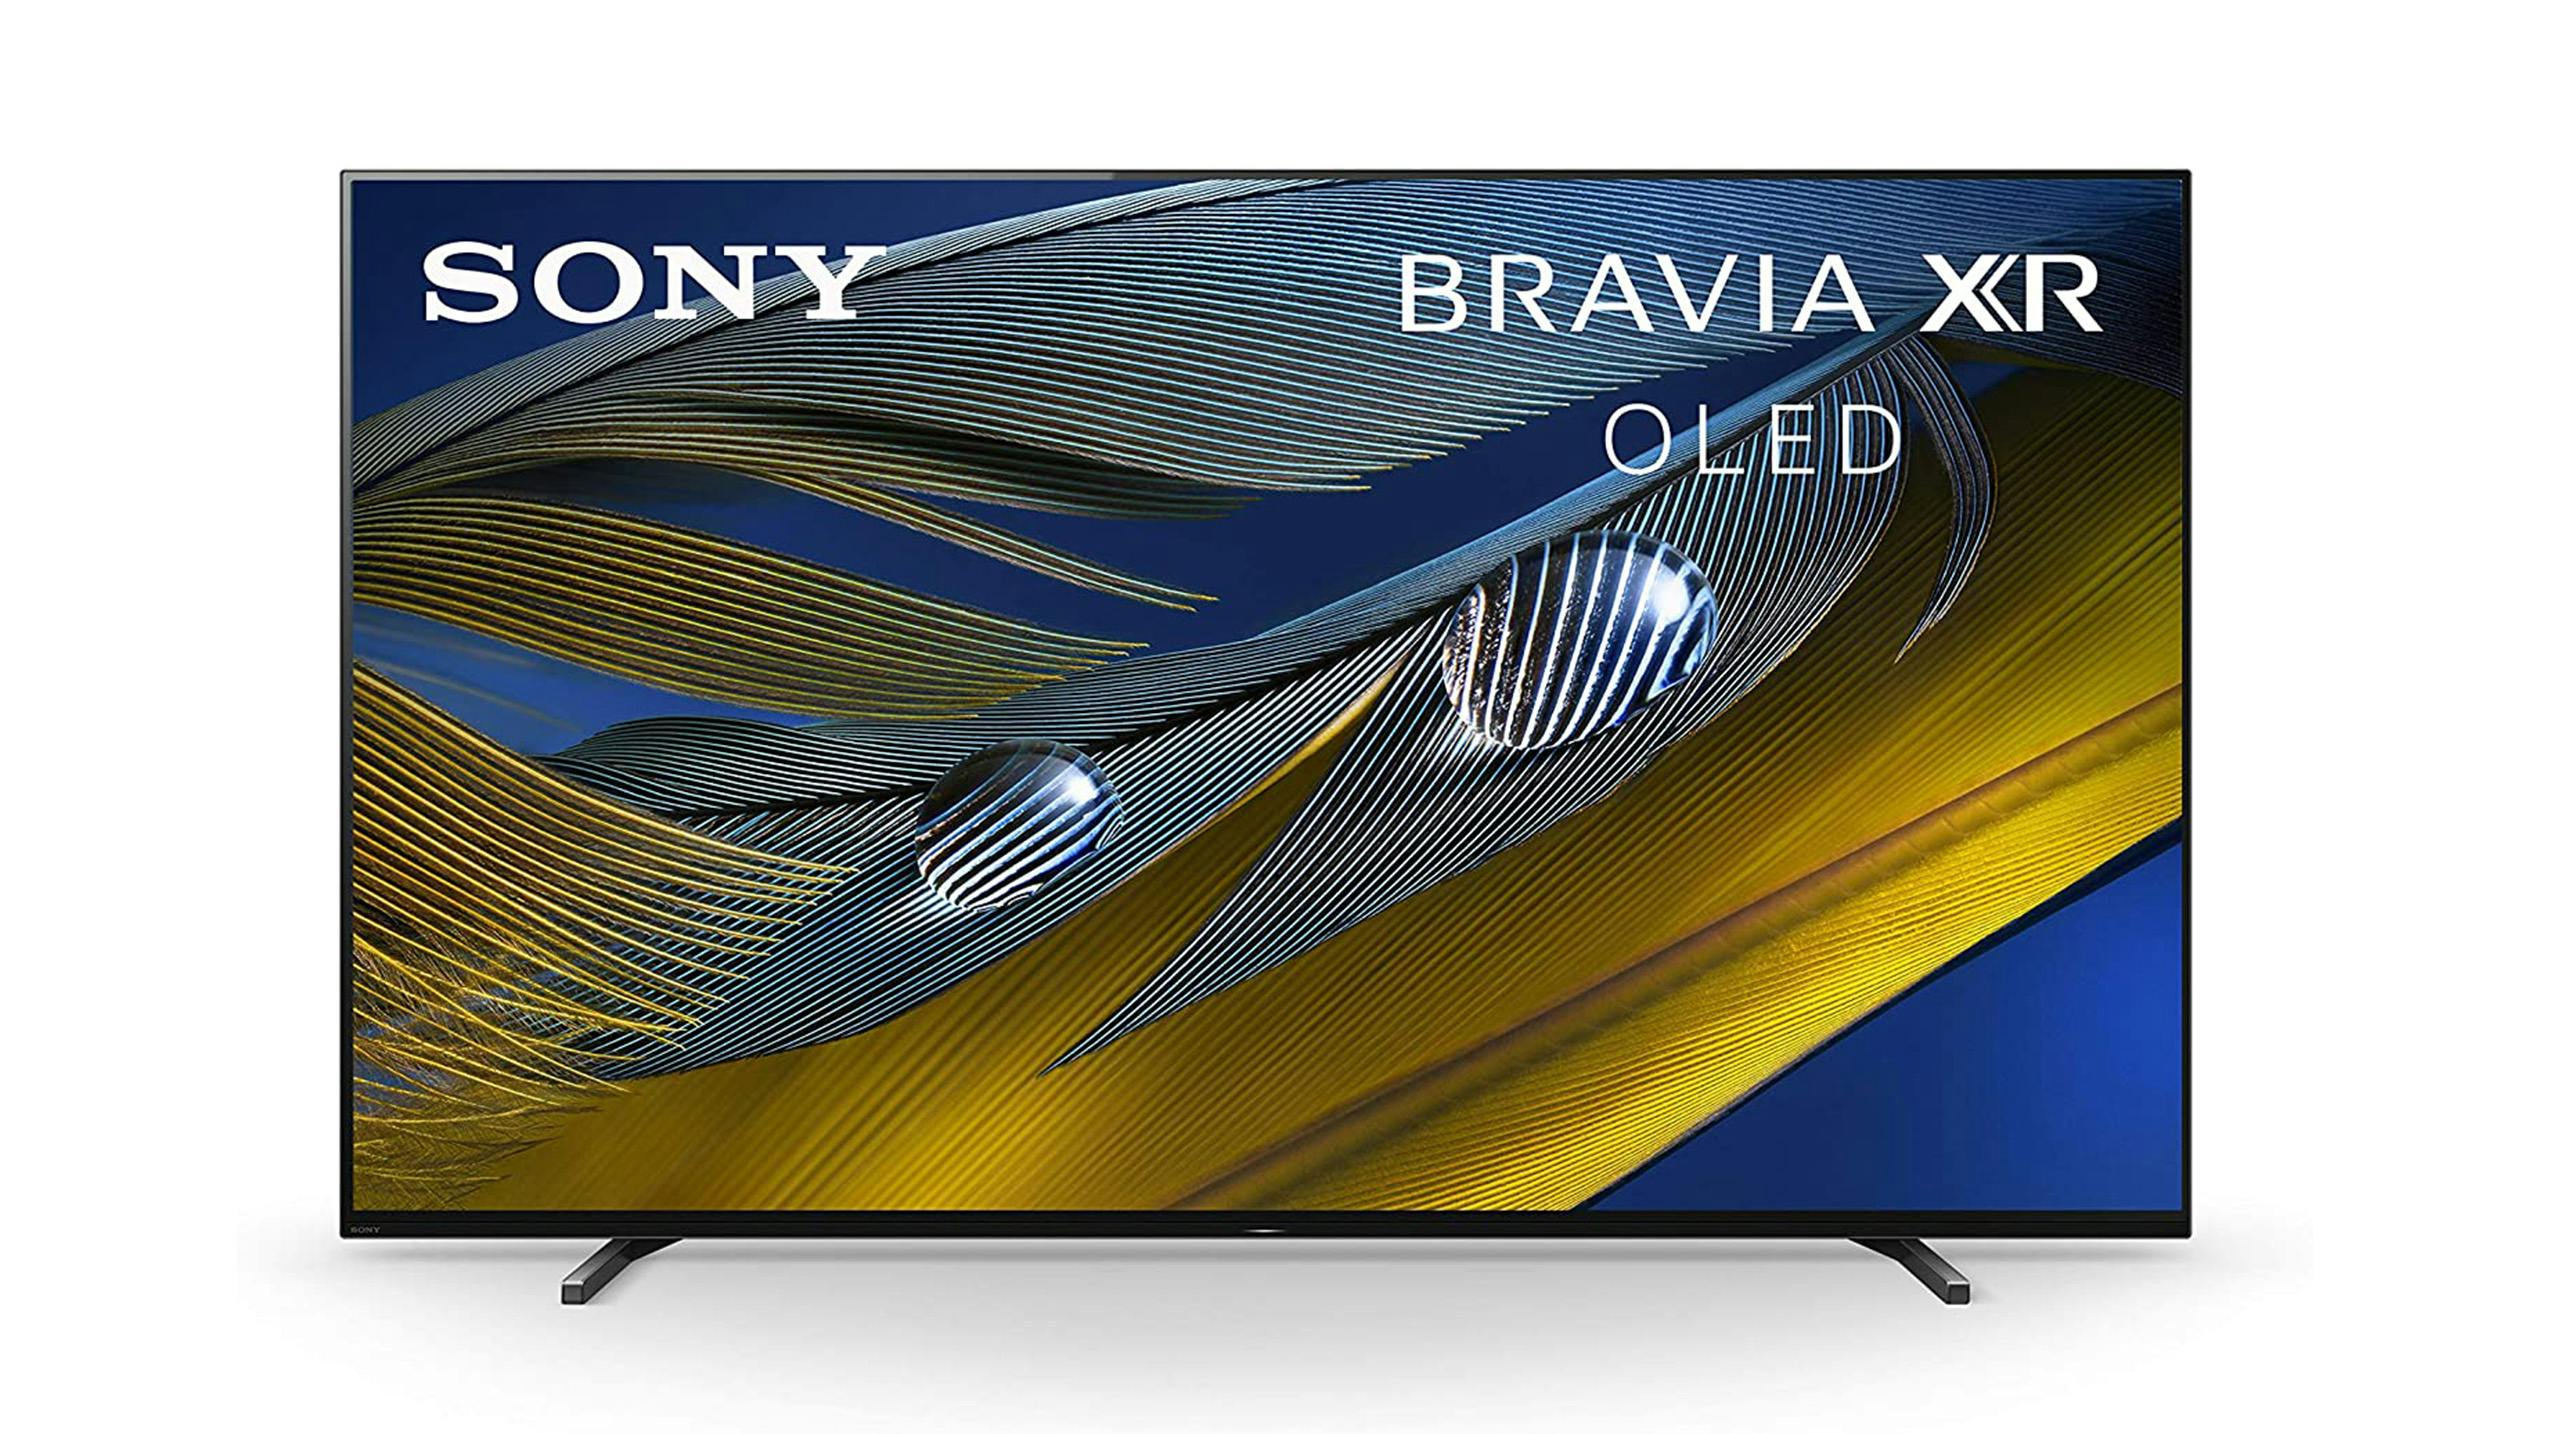 A Sony Bravia XR product image